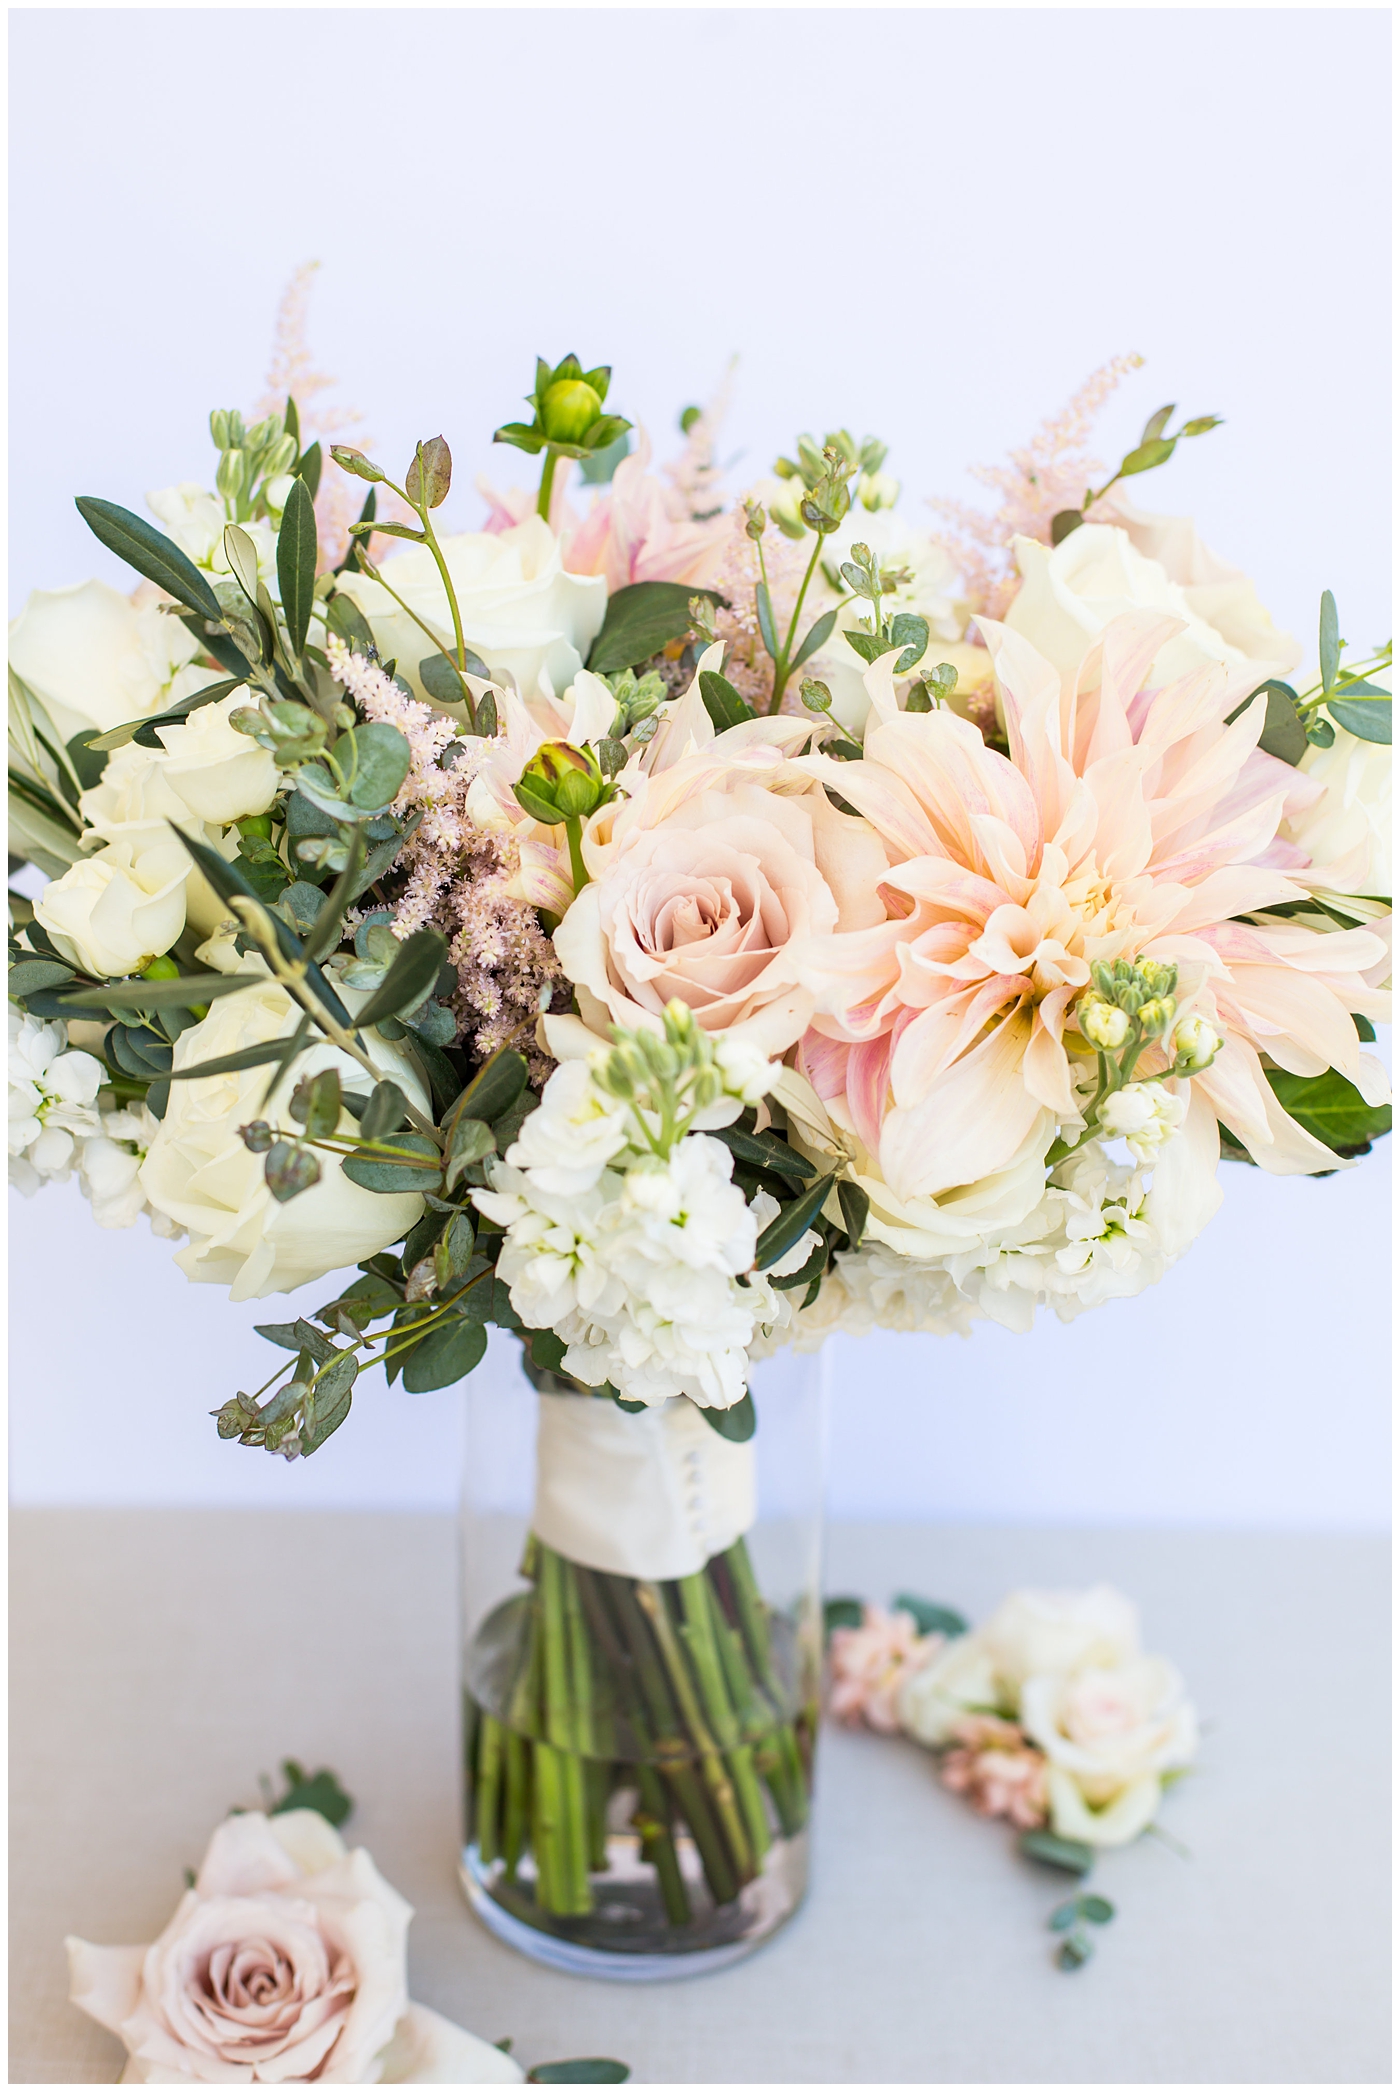 wildflower bridal bouquet with soft pink, blush, white, greenery flowers including roses, dahlias, snapdragons